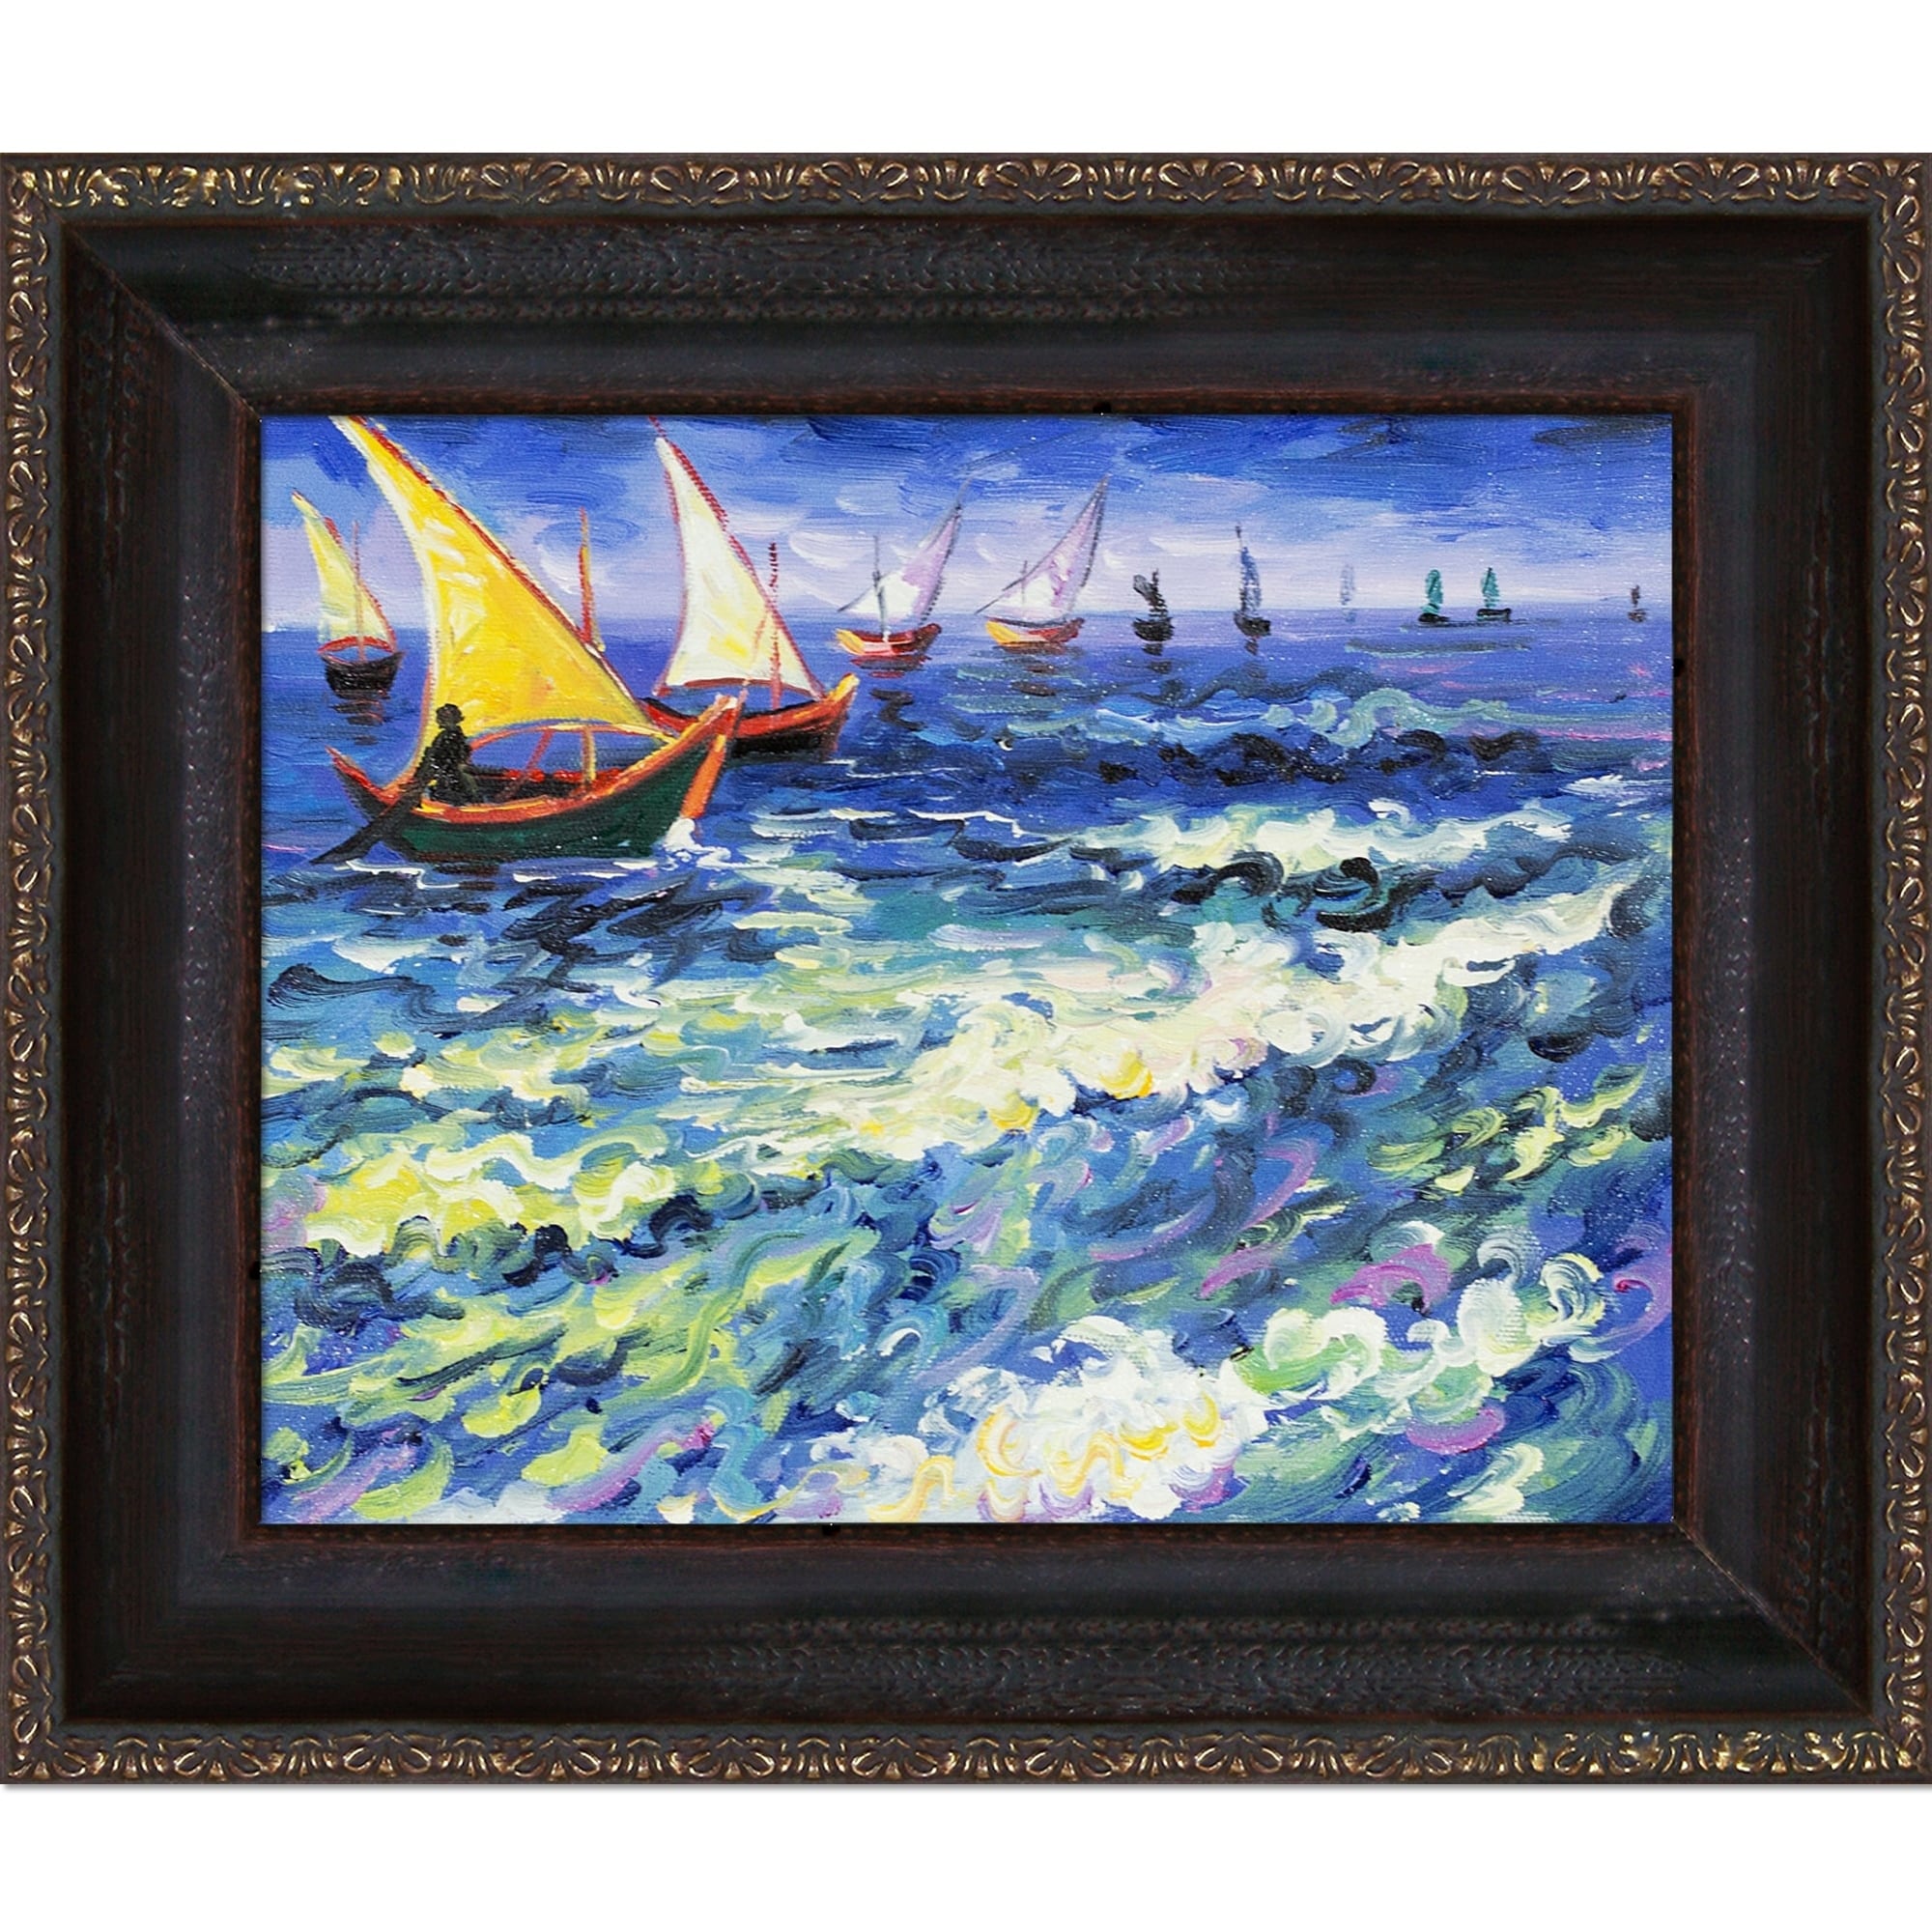 Dream-art Oil painting seascape sail boats with ocean waves hand painted canvas 